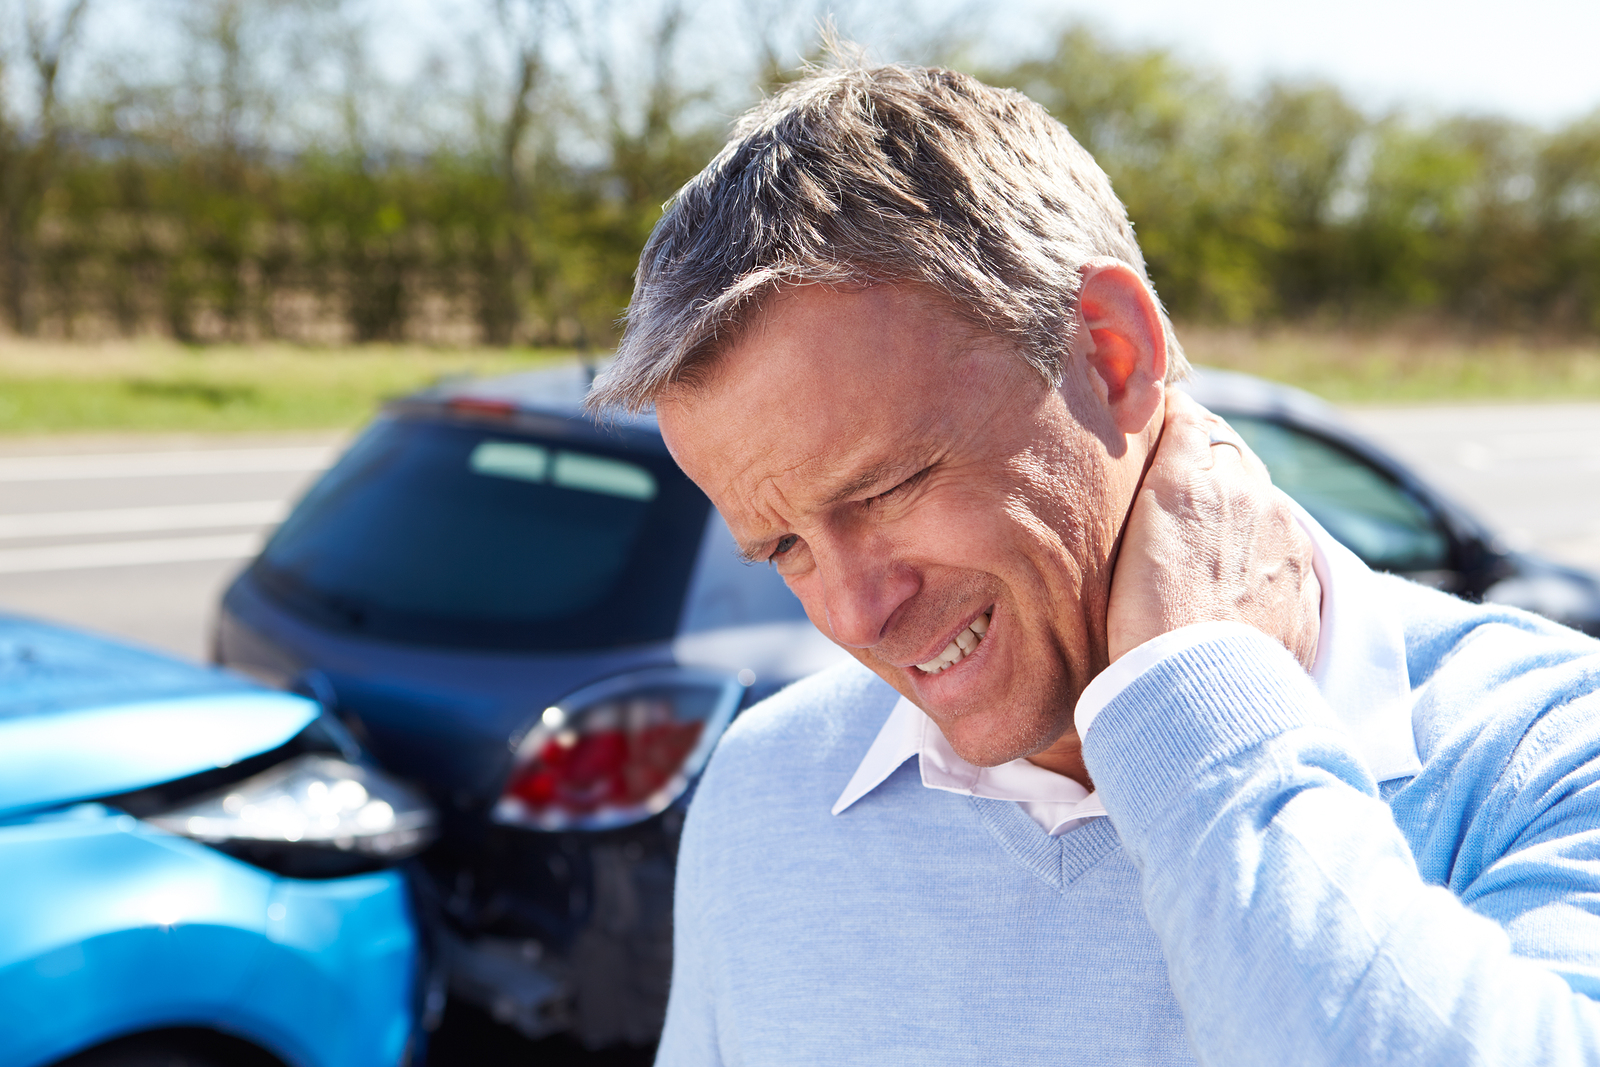 Driver in an auto accident and suffering from back pain